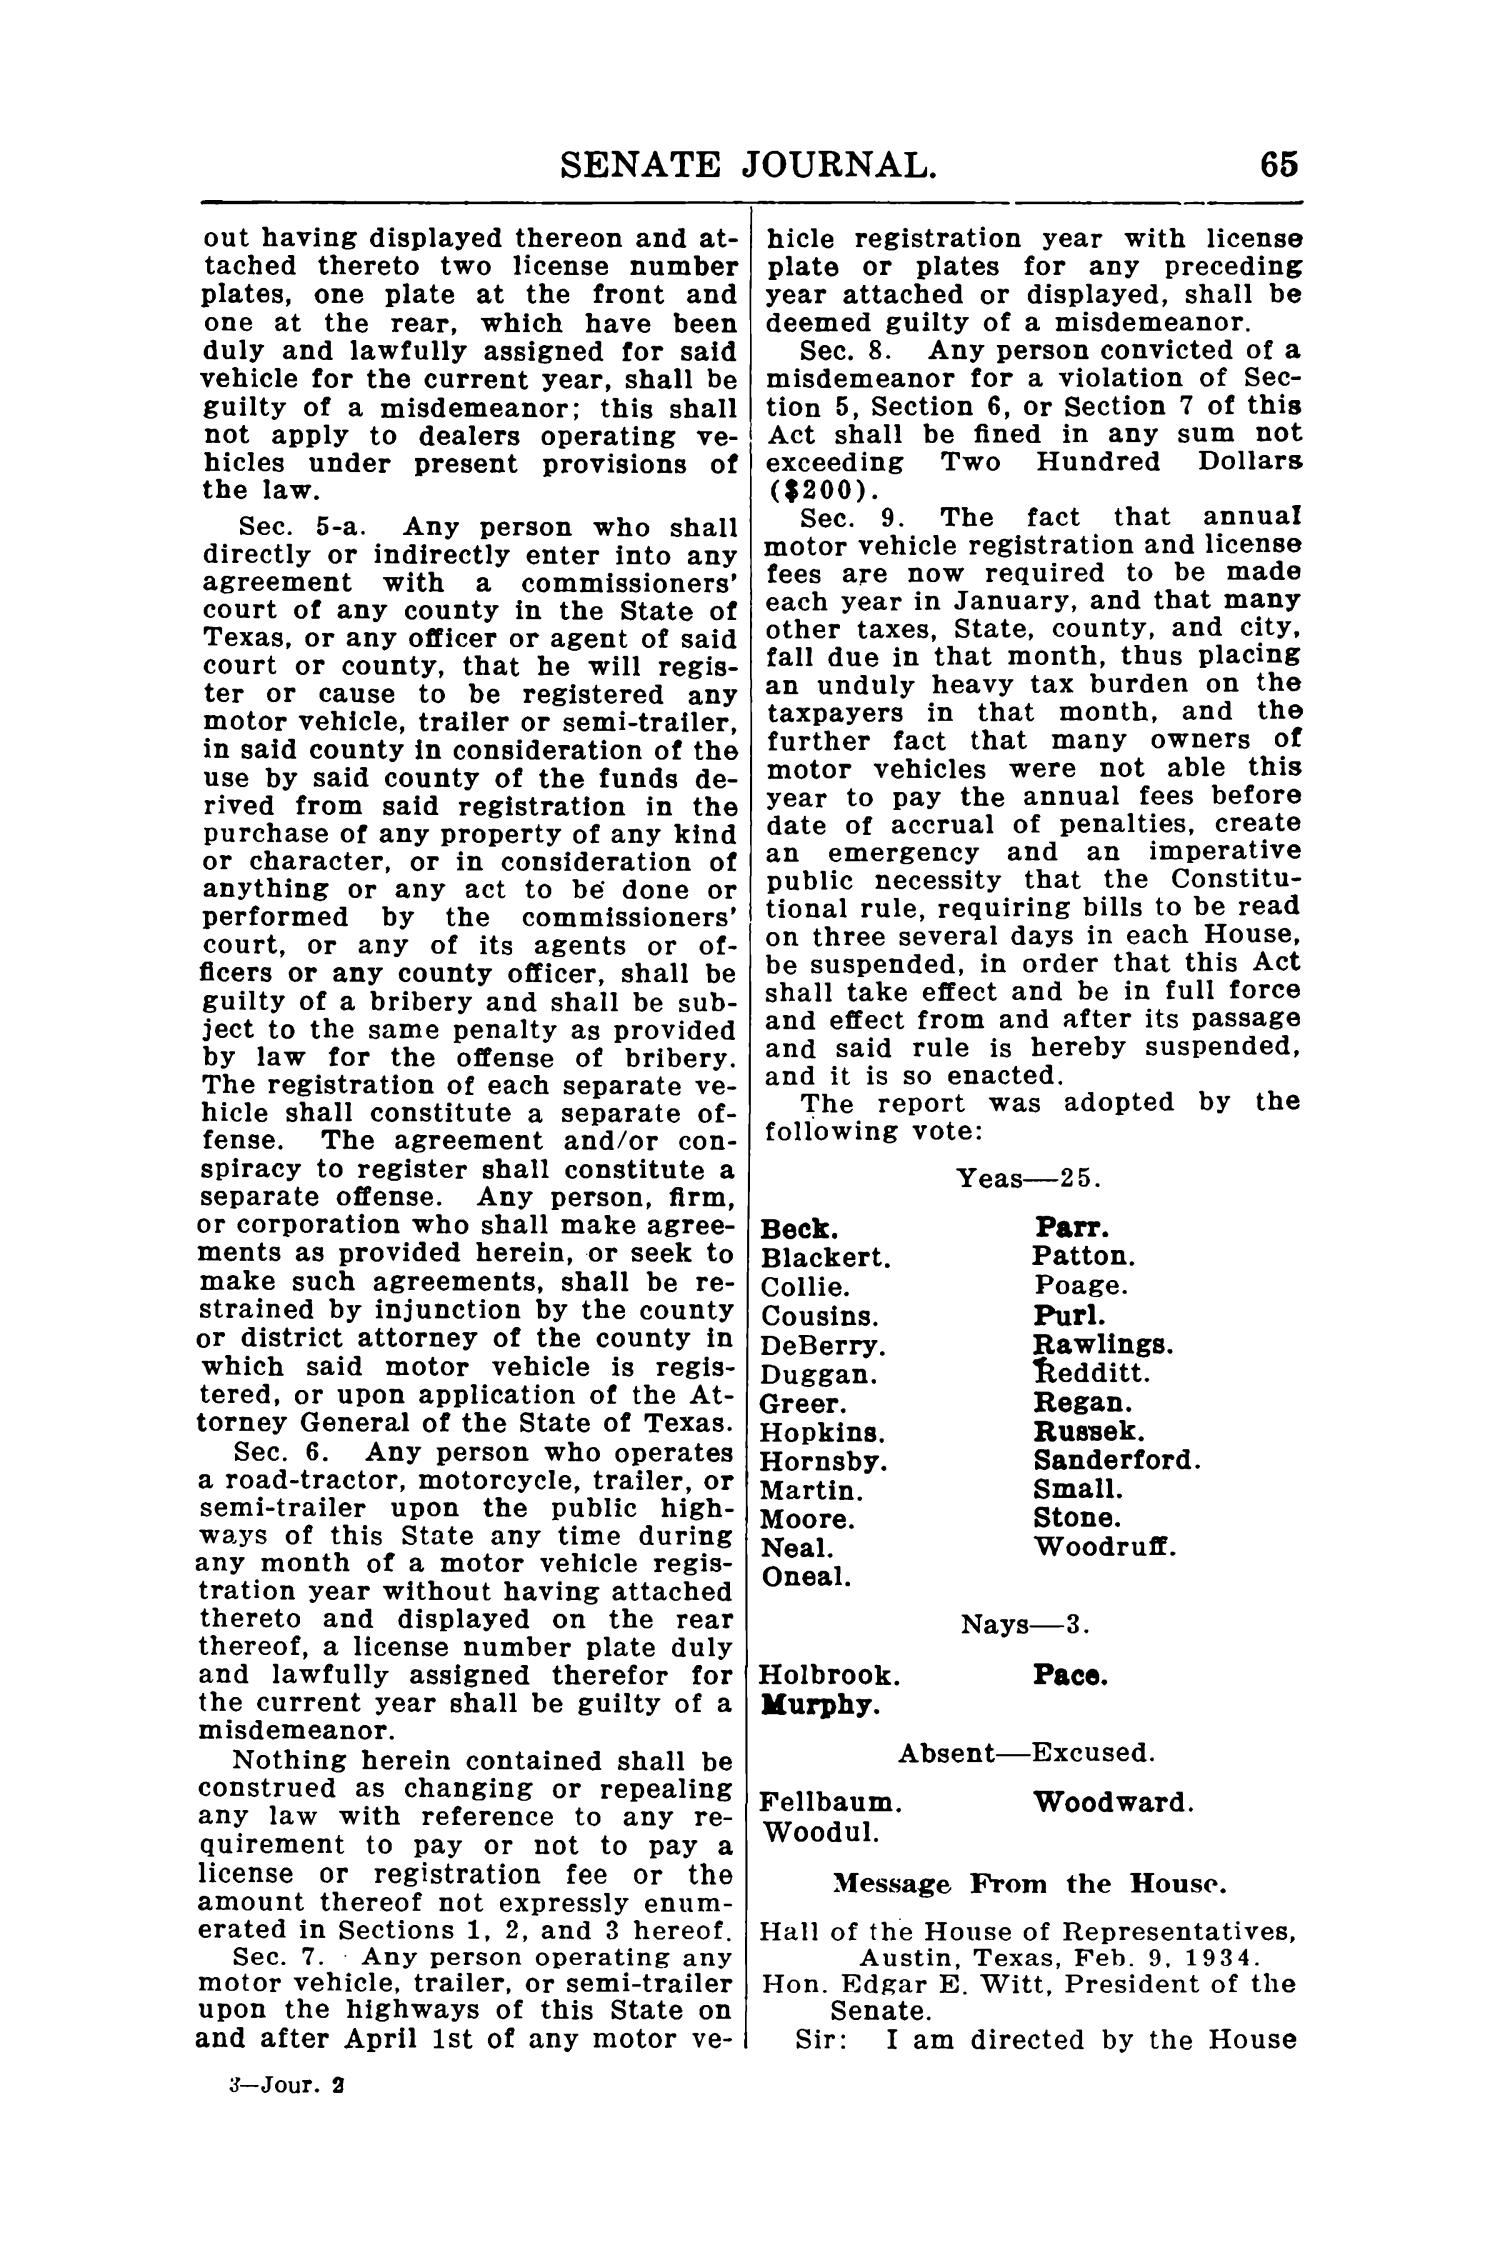 Journal of the Senate of Texas being the Second Called Session of the Forty-Third Legislature
                                                
                                                    65
                                                